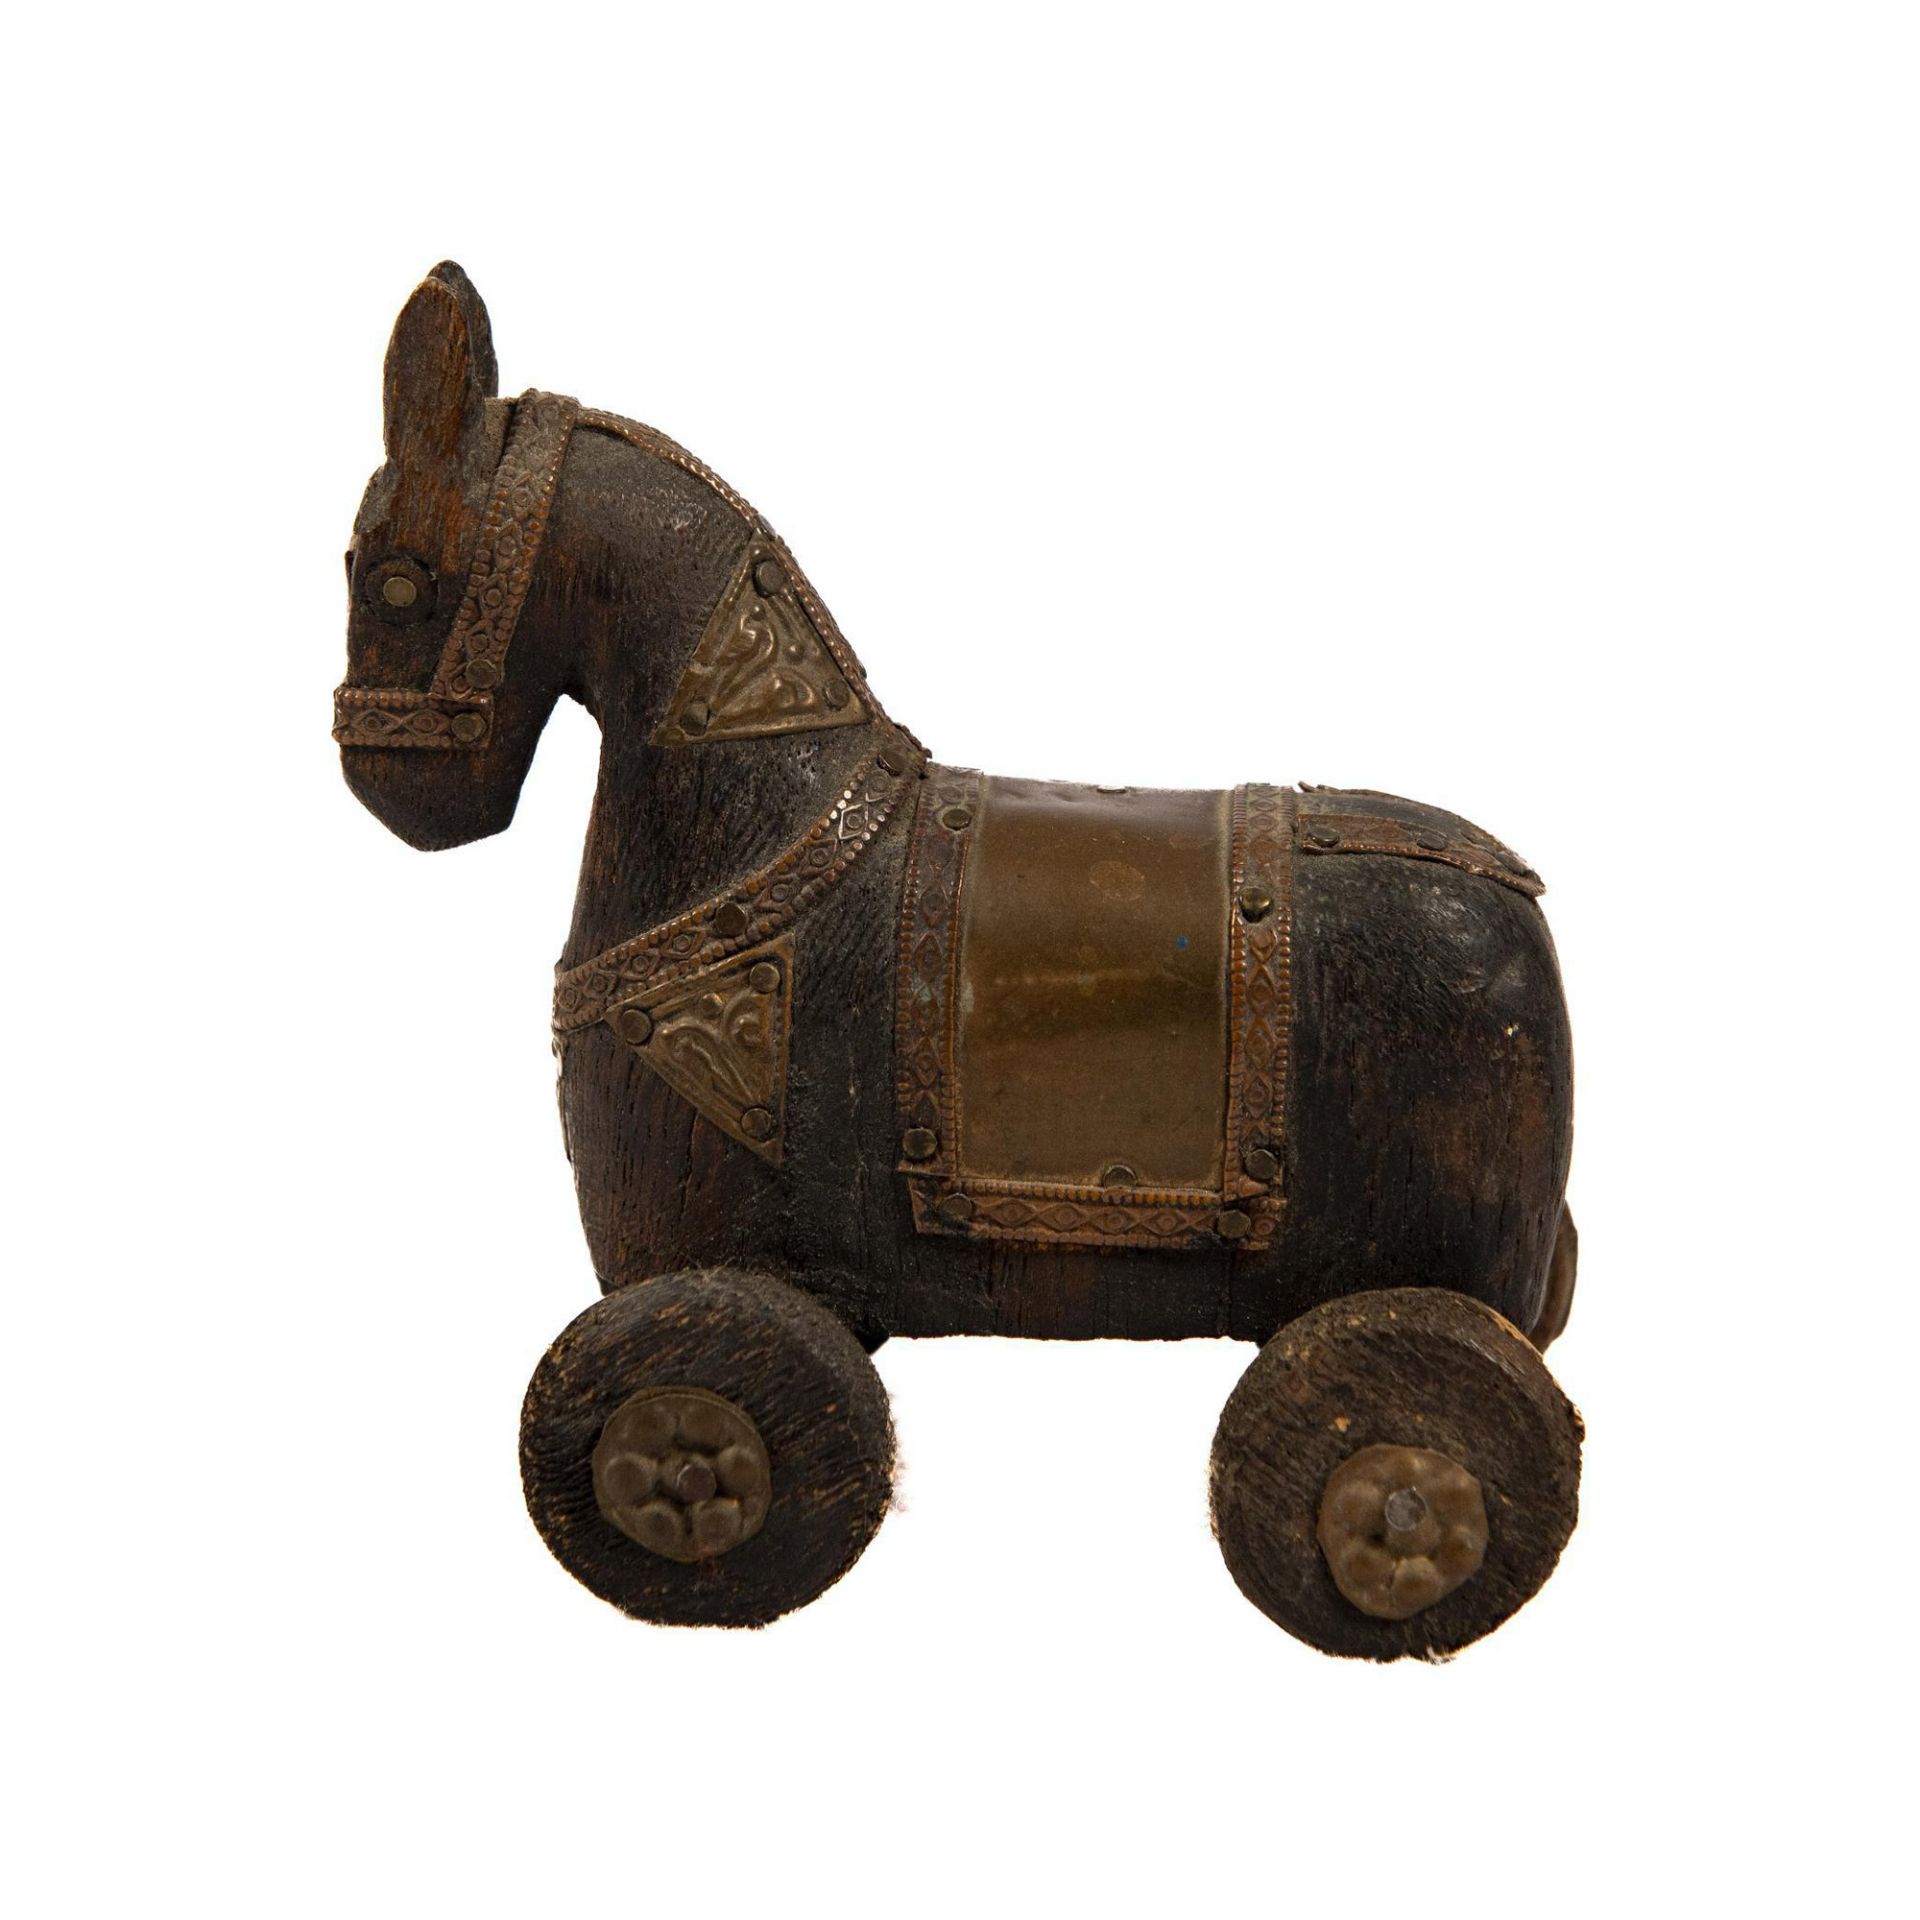 Antique Handcrafted Rajasthani Horse on Wheels - Image 2 of 4